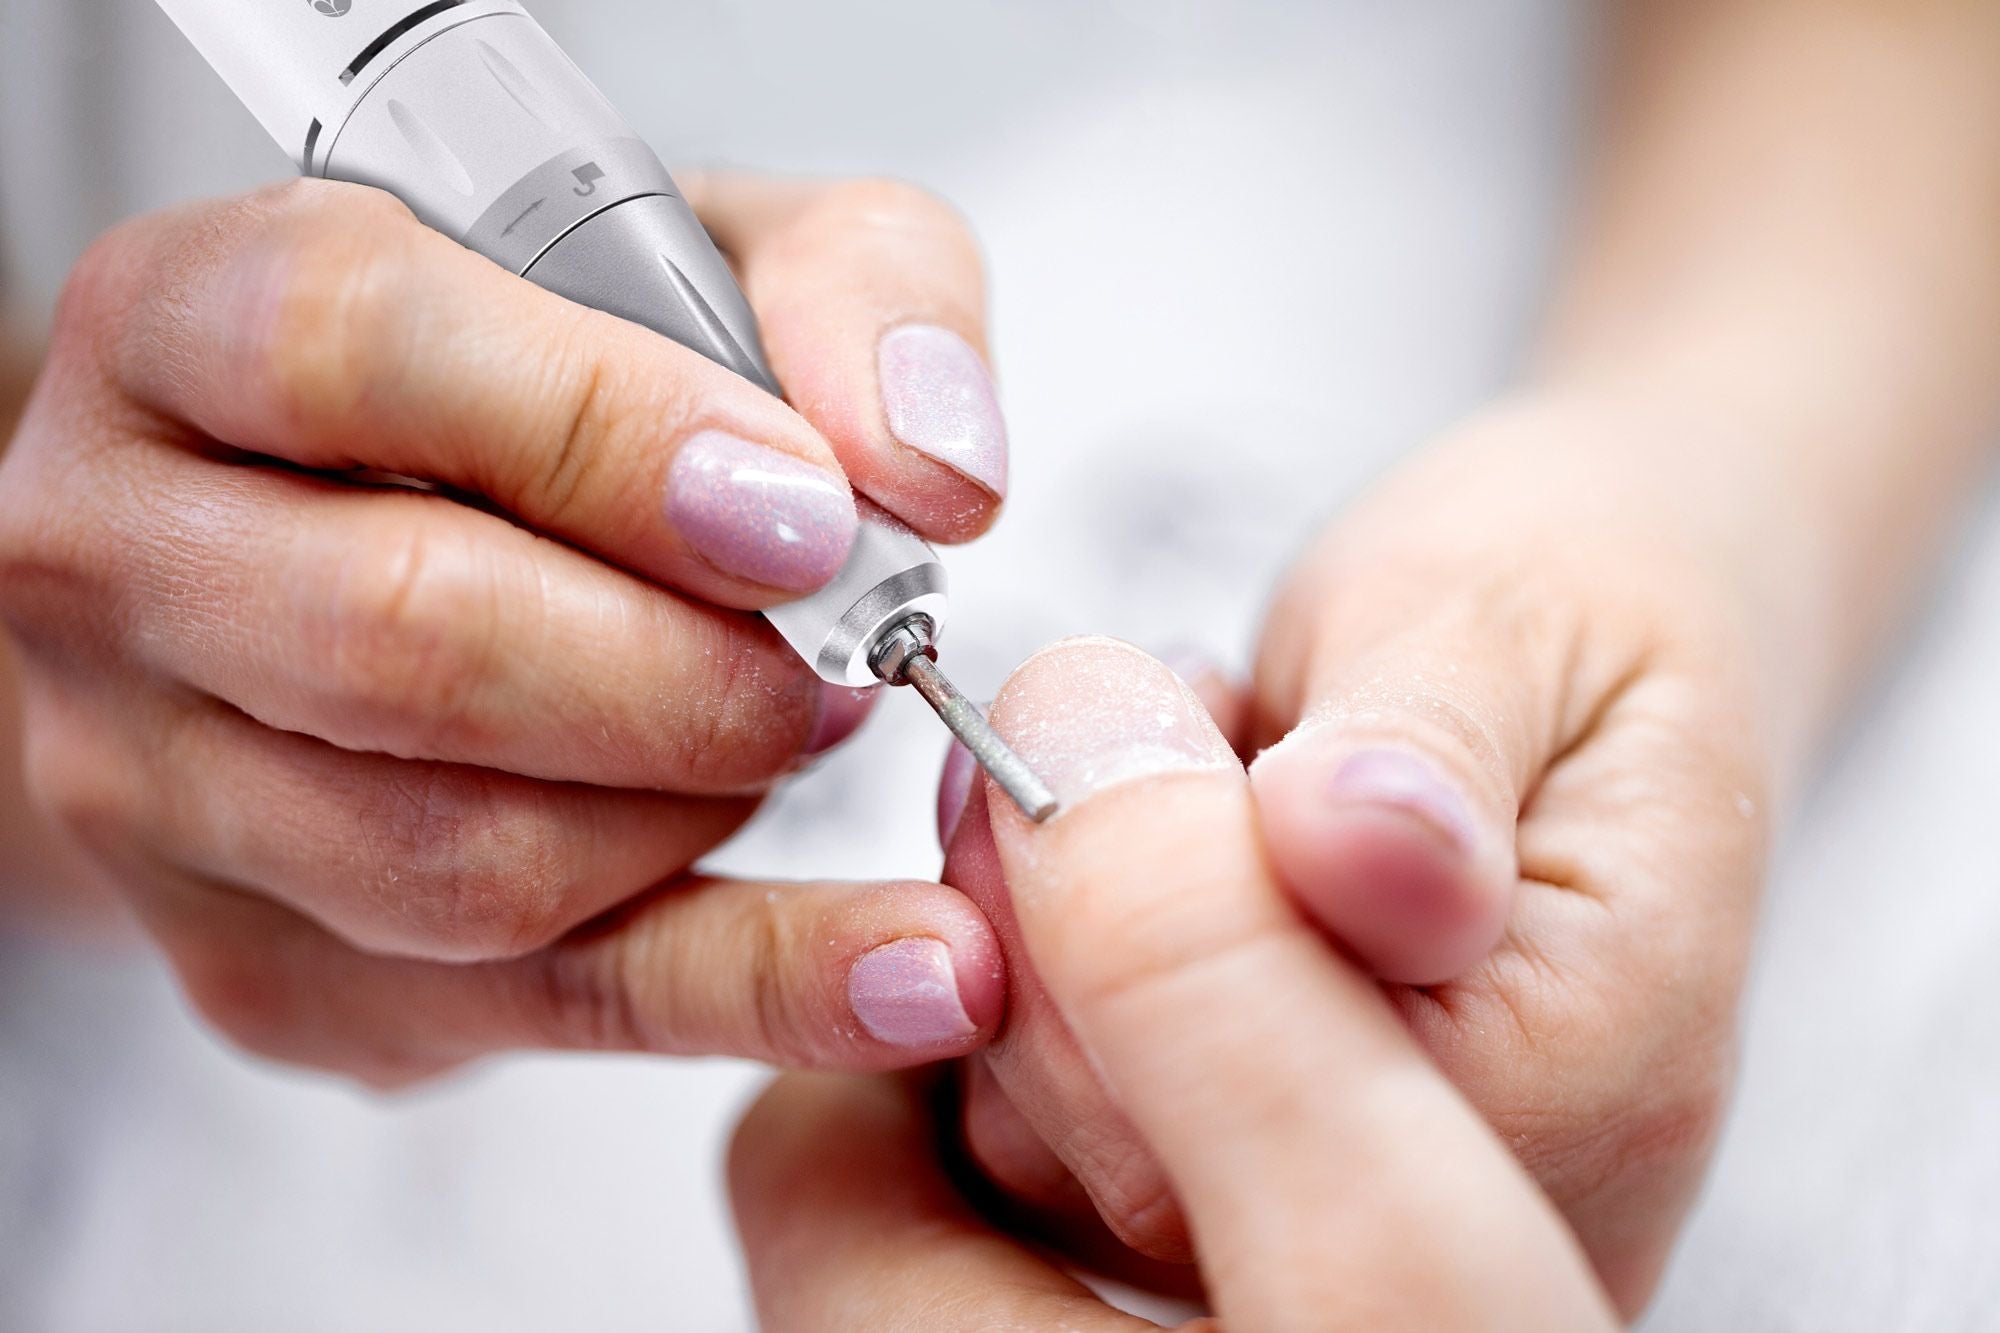 electric nail file being used by a professional to file thumb nail cuticle